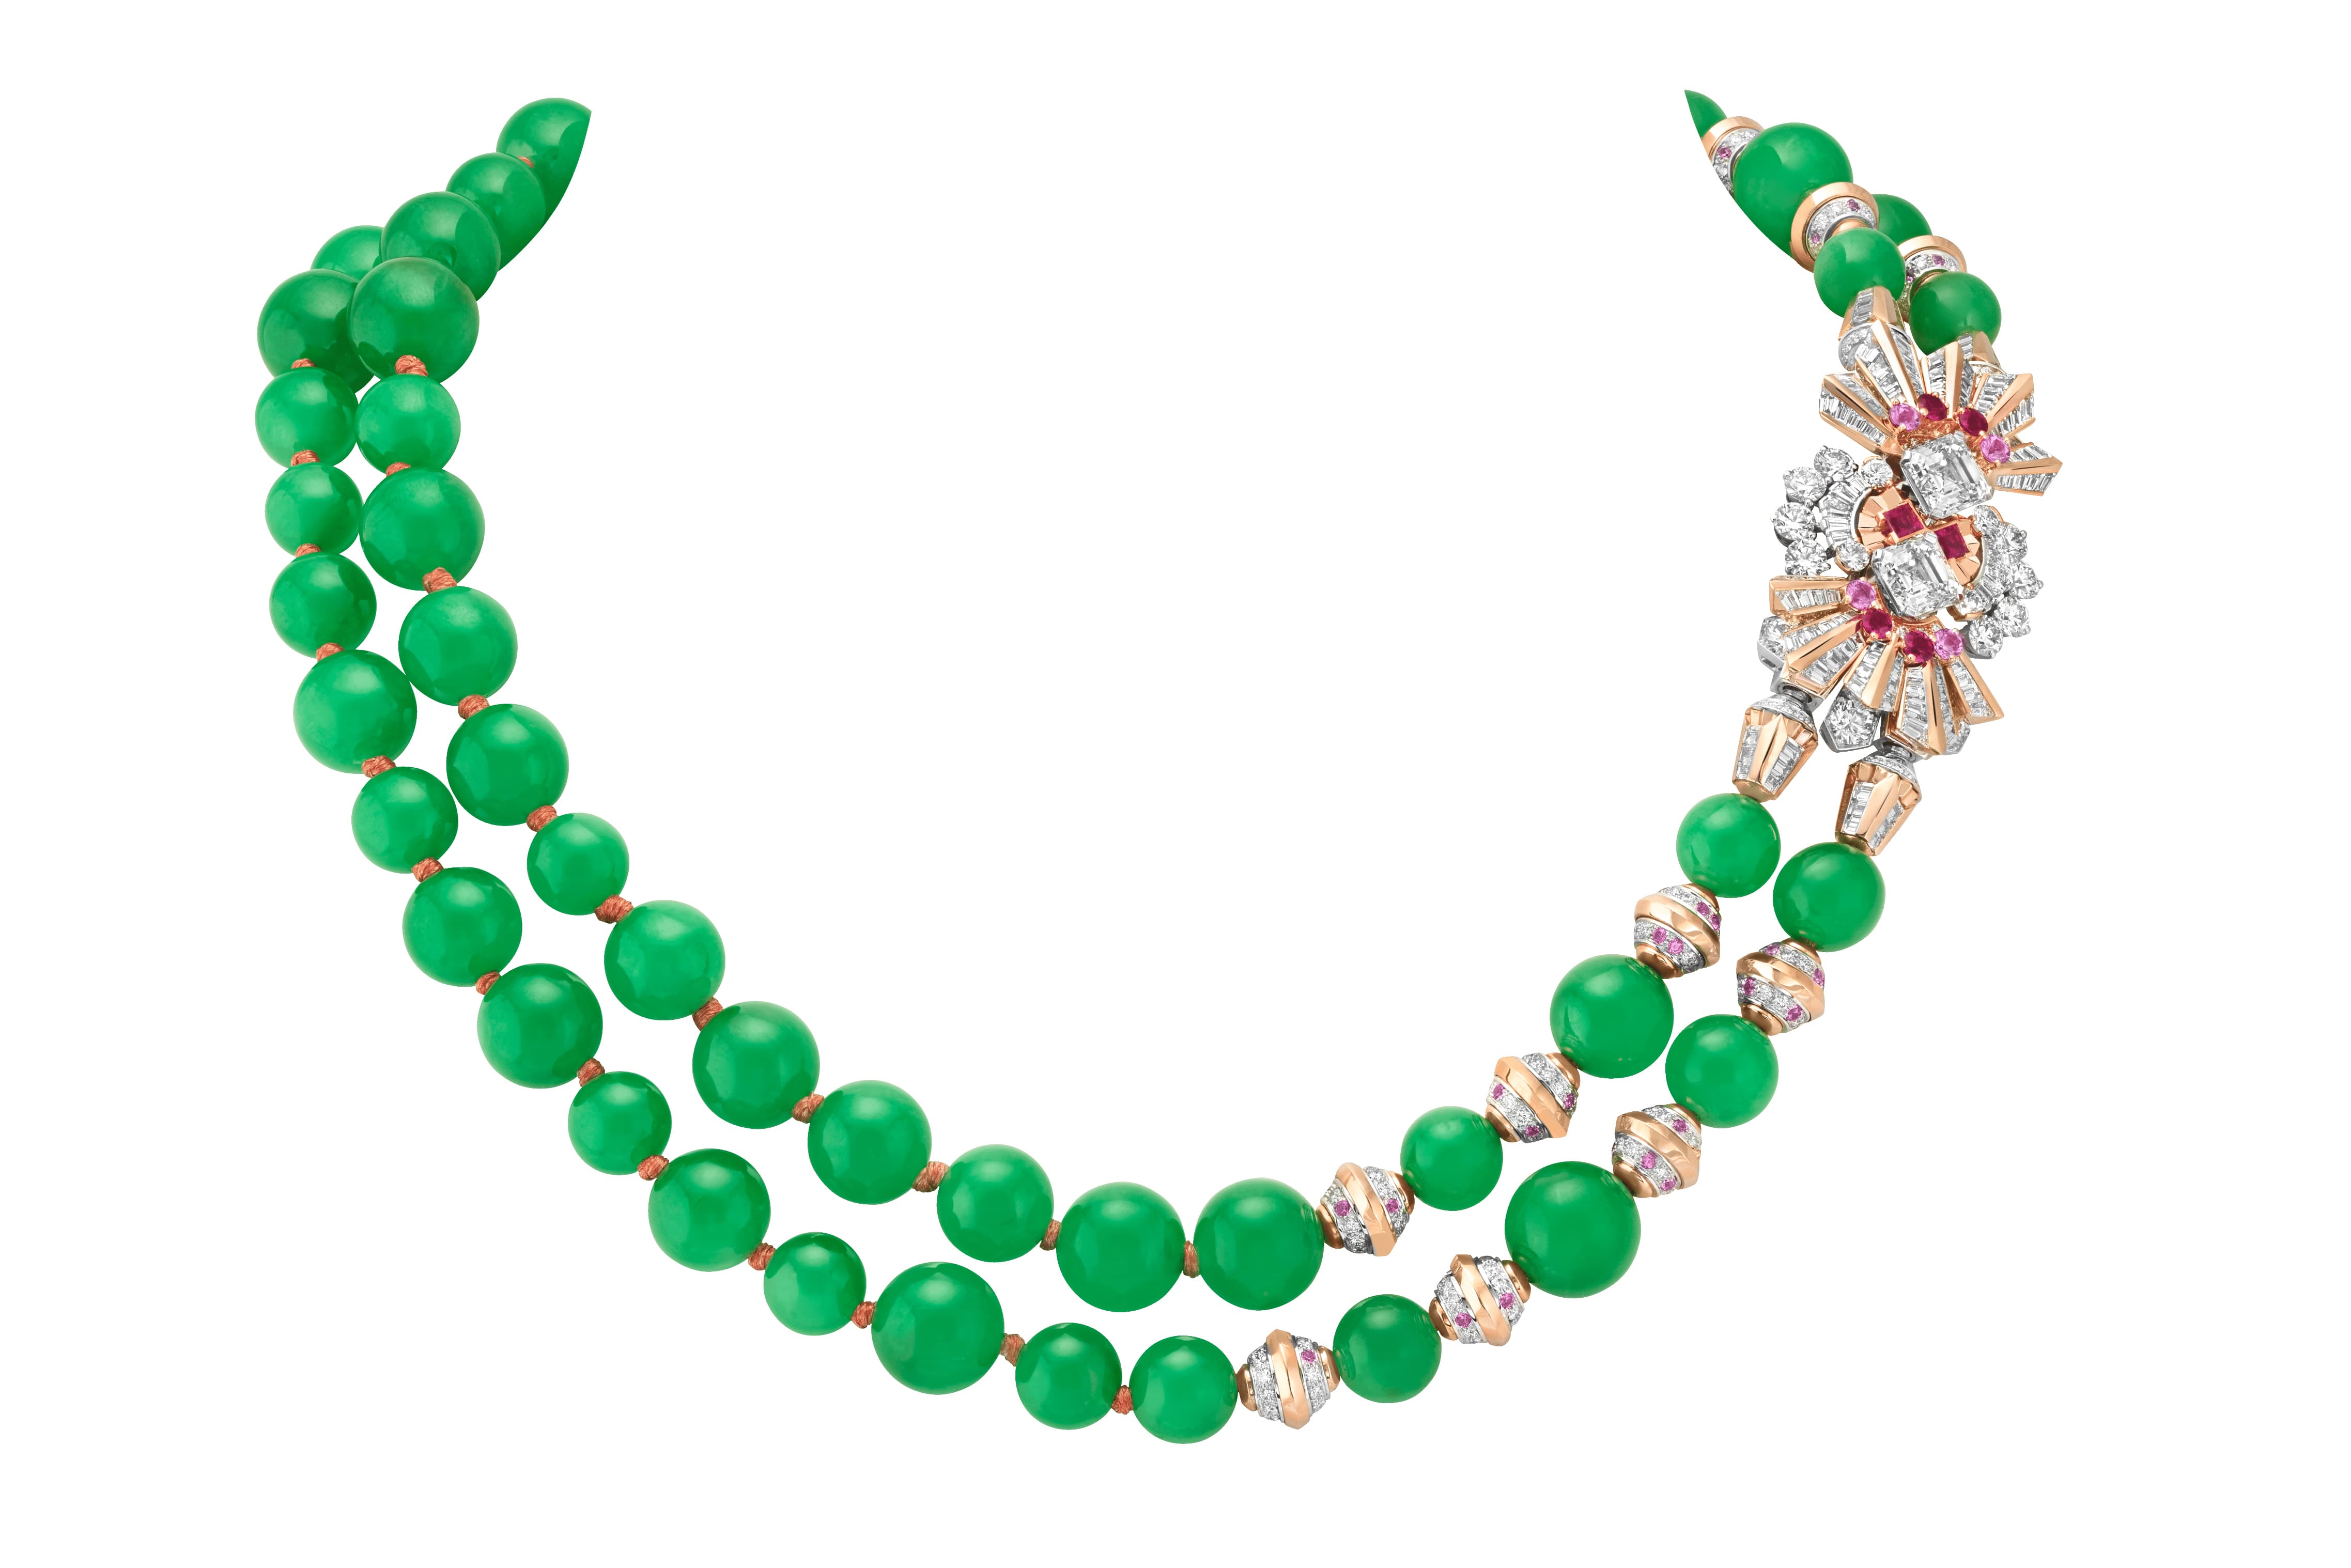 Van Cleef & Arpels Étoile Binaire transformable necklace with 63 jade beads, two asscher cut diamonds, pink sapphires, rubies and further diamonds